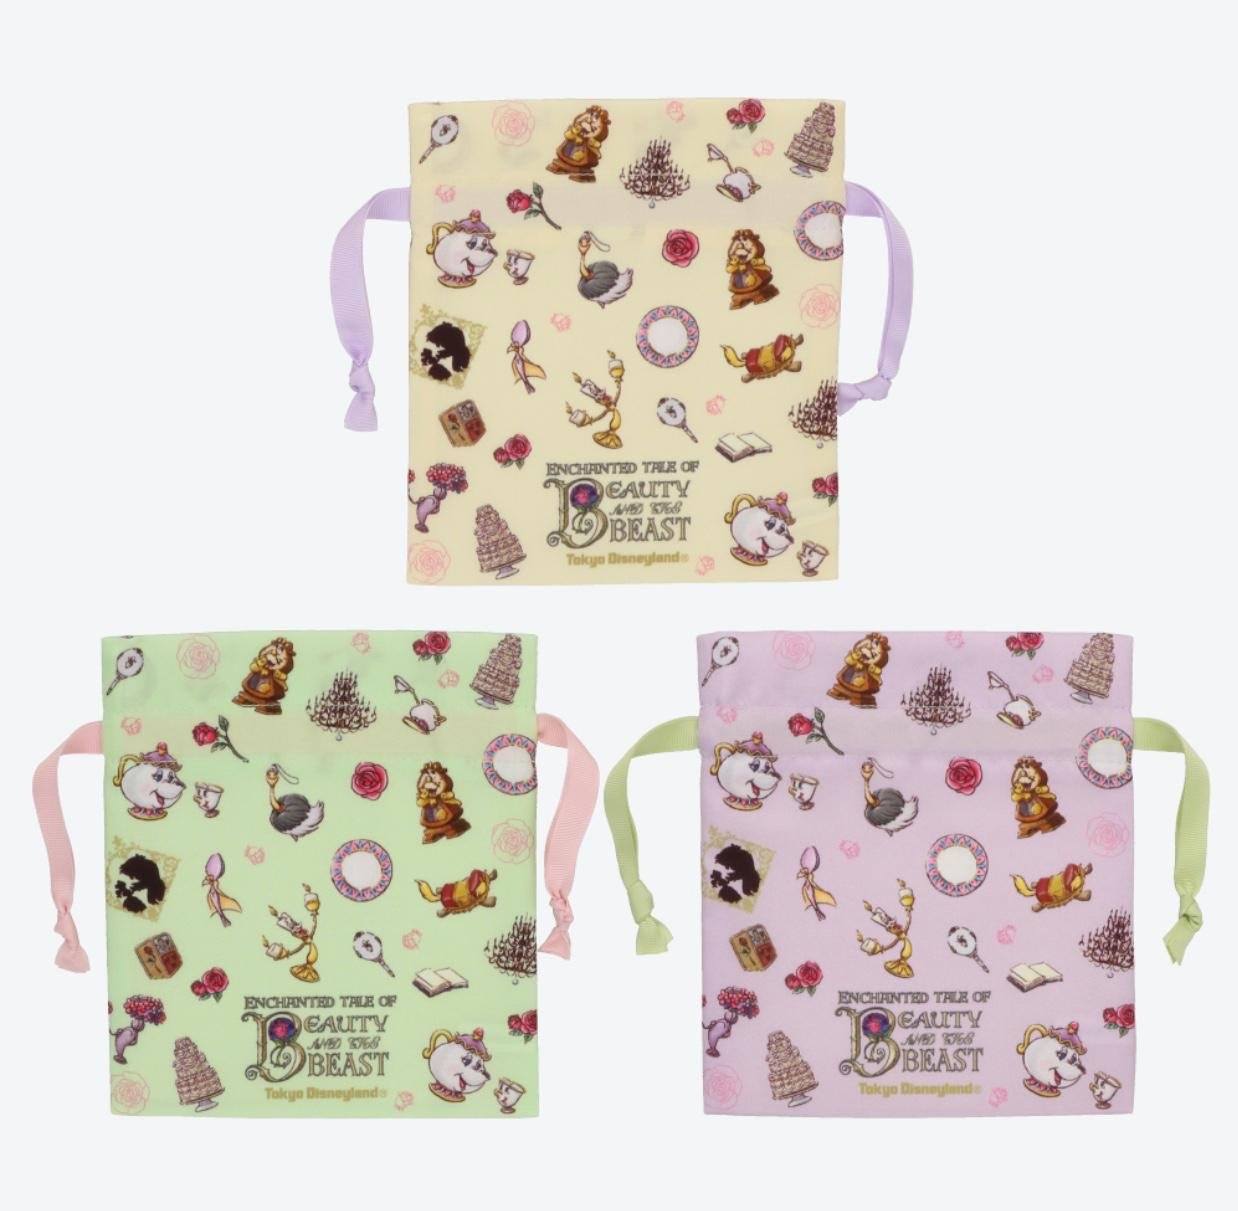 TDR - Enchanted Tale of Beauty and the Beast Collection - Drawstring Bag All-Over-Print Set of 3